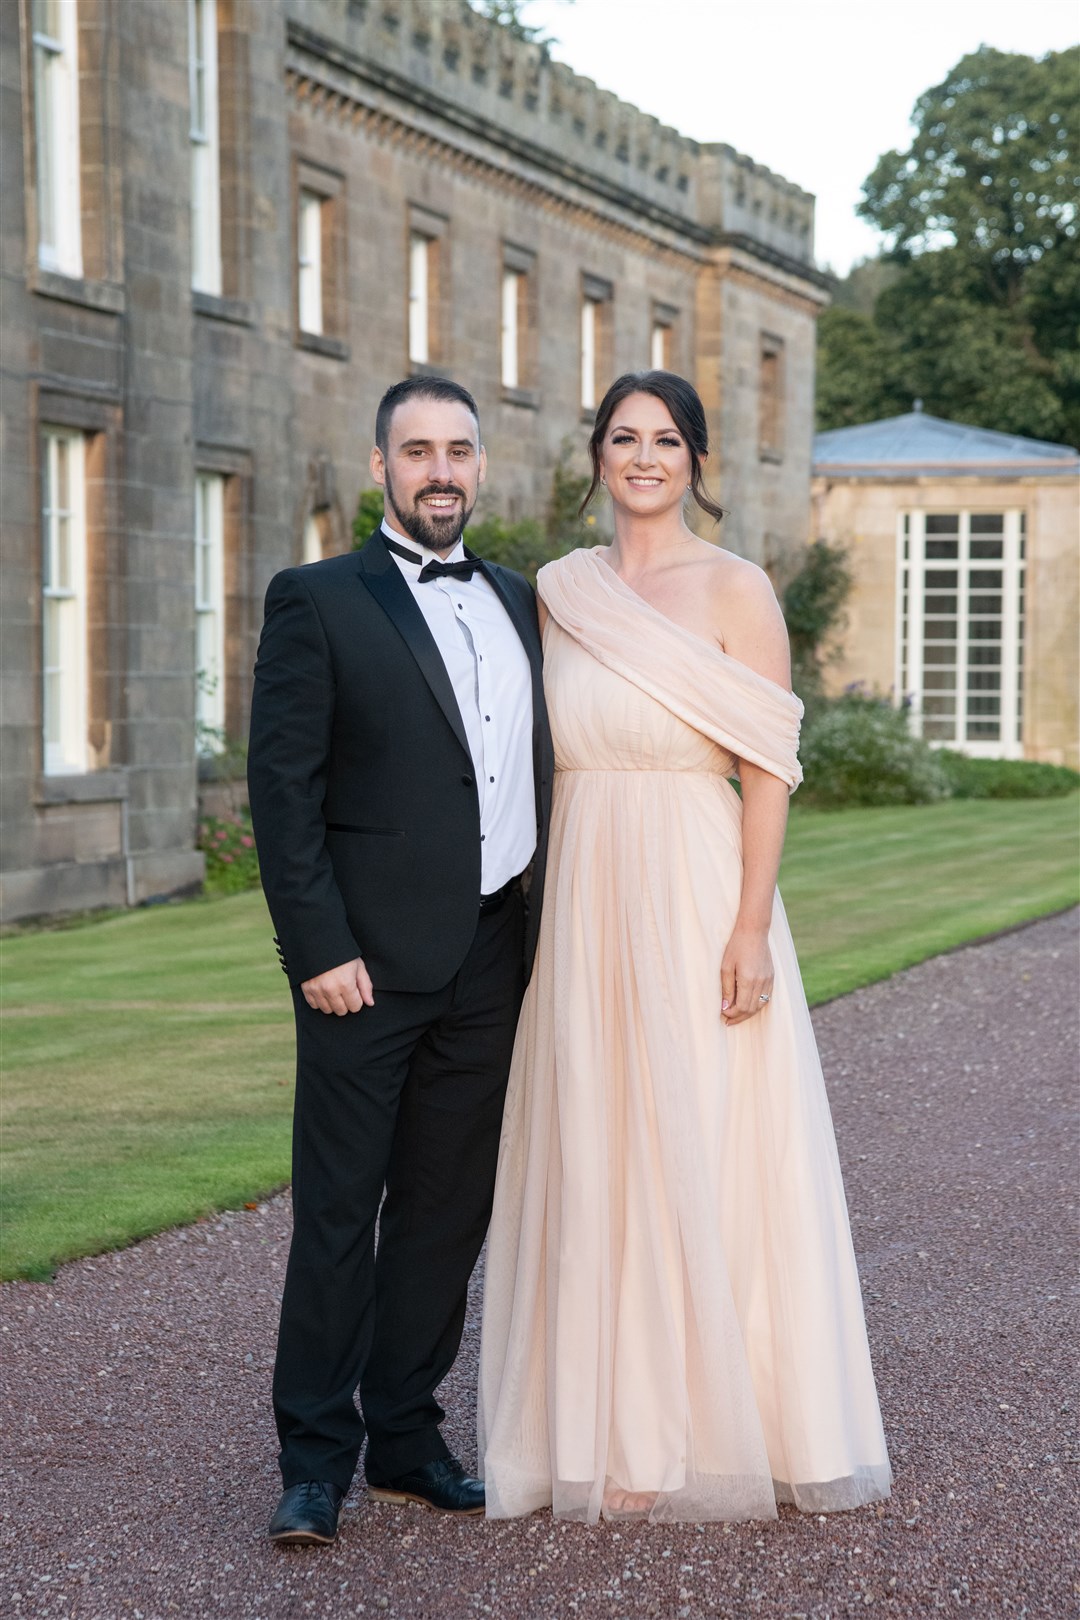 Alan and Sarah Medcraf...17th Annual Moray Chamber of Commerce Awards Dinner, held at Gordon Castle on Friday 30th September 2022...Picture: Daniel Forsyth..